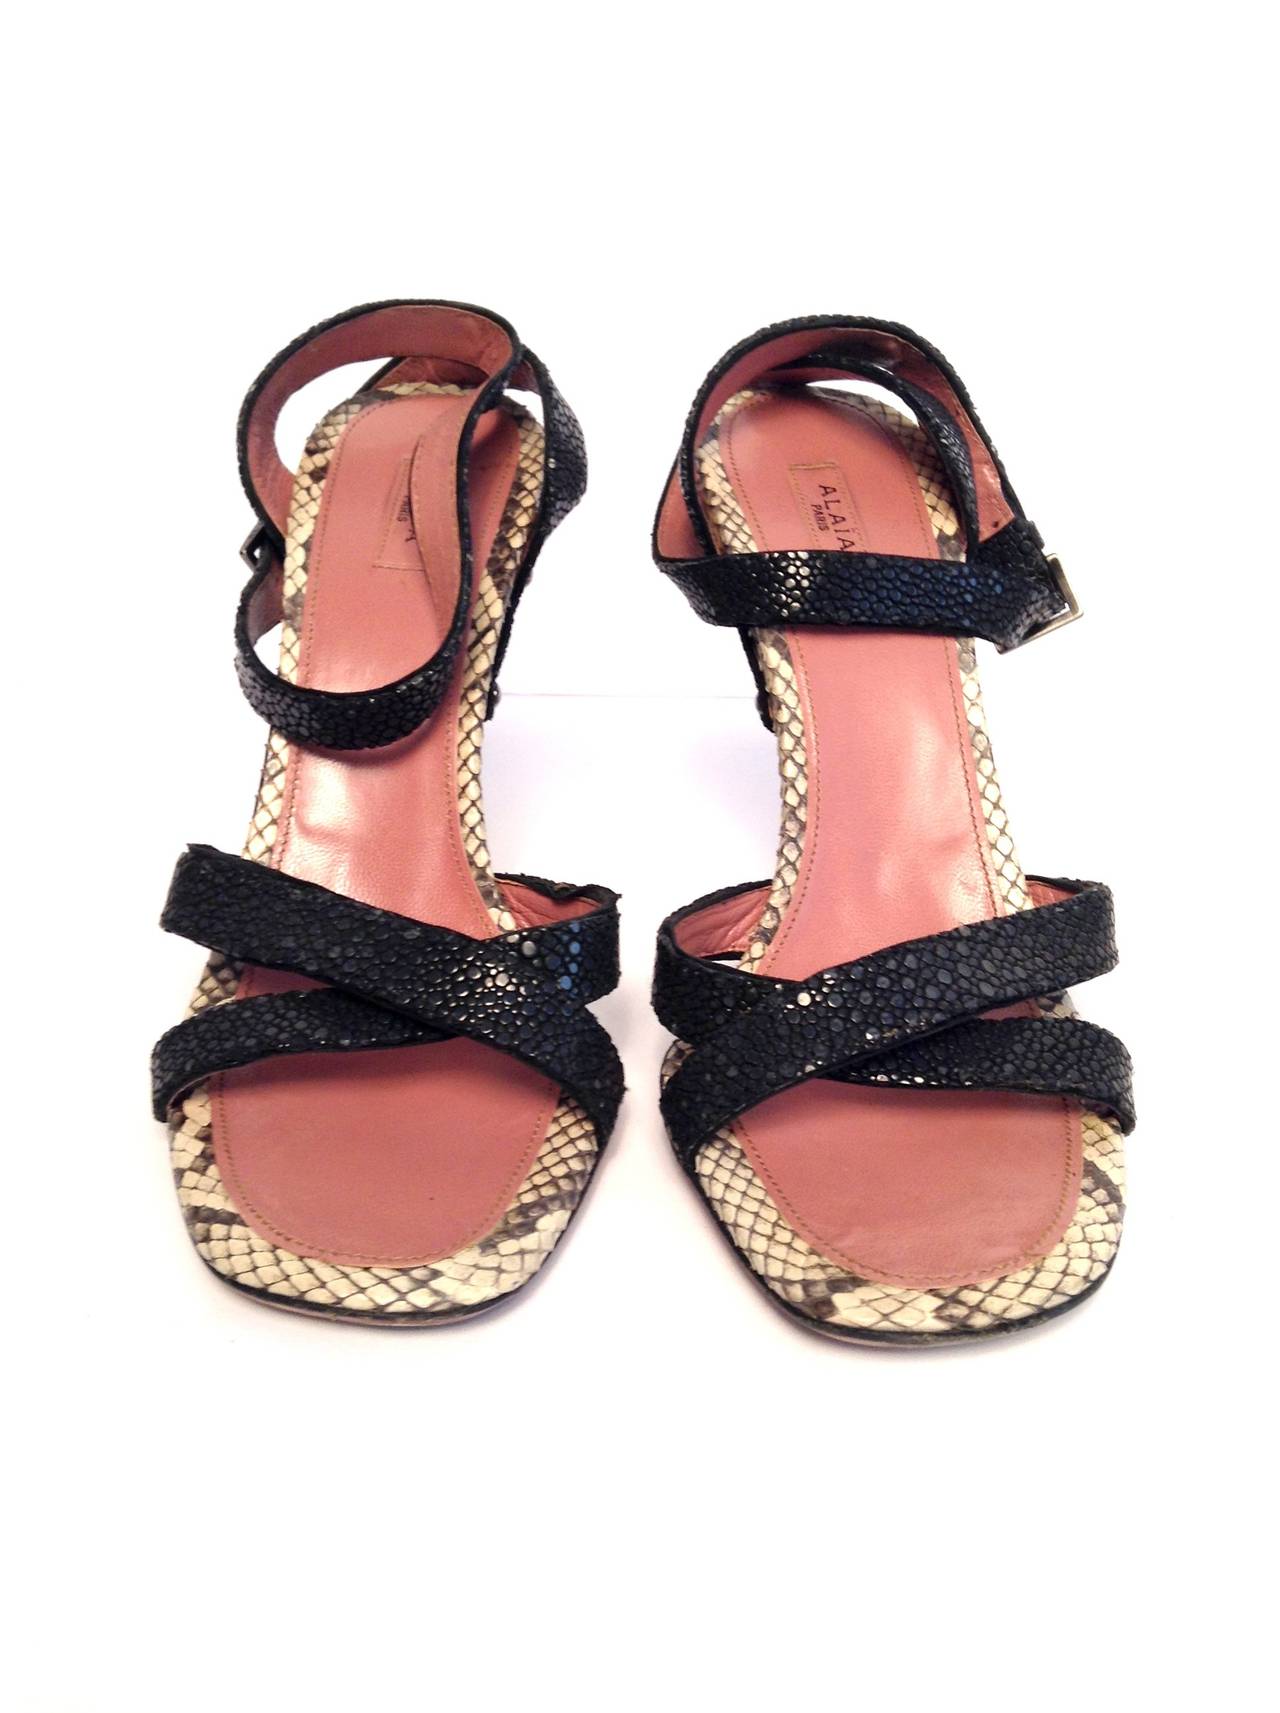 Wear these Alaia wedges day or night! Black straps sit atop a python-covered wedge heel with cool buckle detailing at the back of the heel. Adjustable ankle strap with silver tone hardware. 

Measurements: 4.5